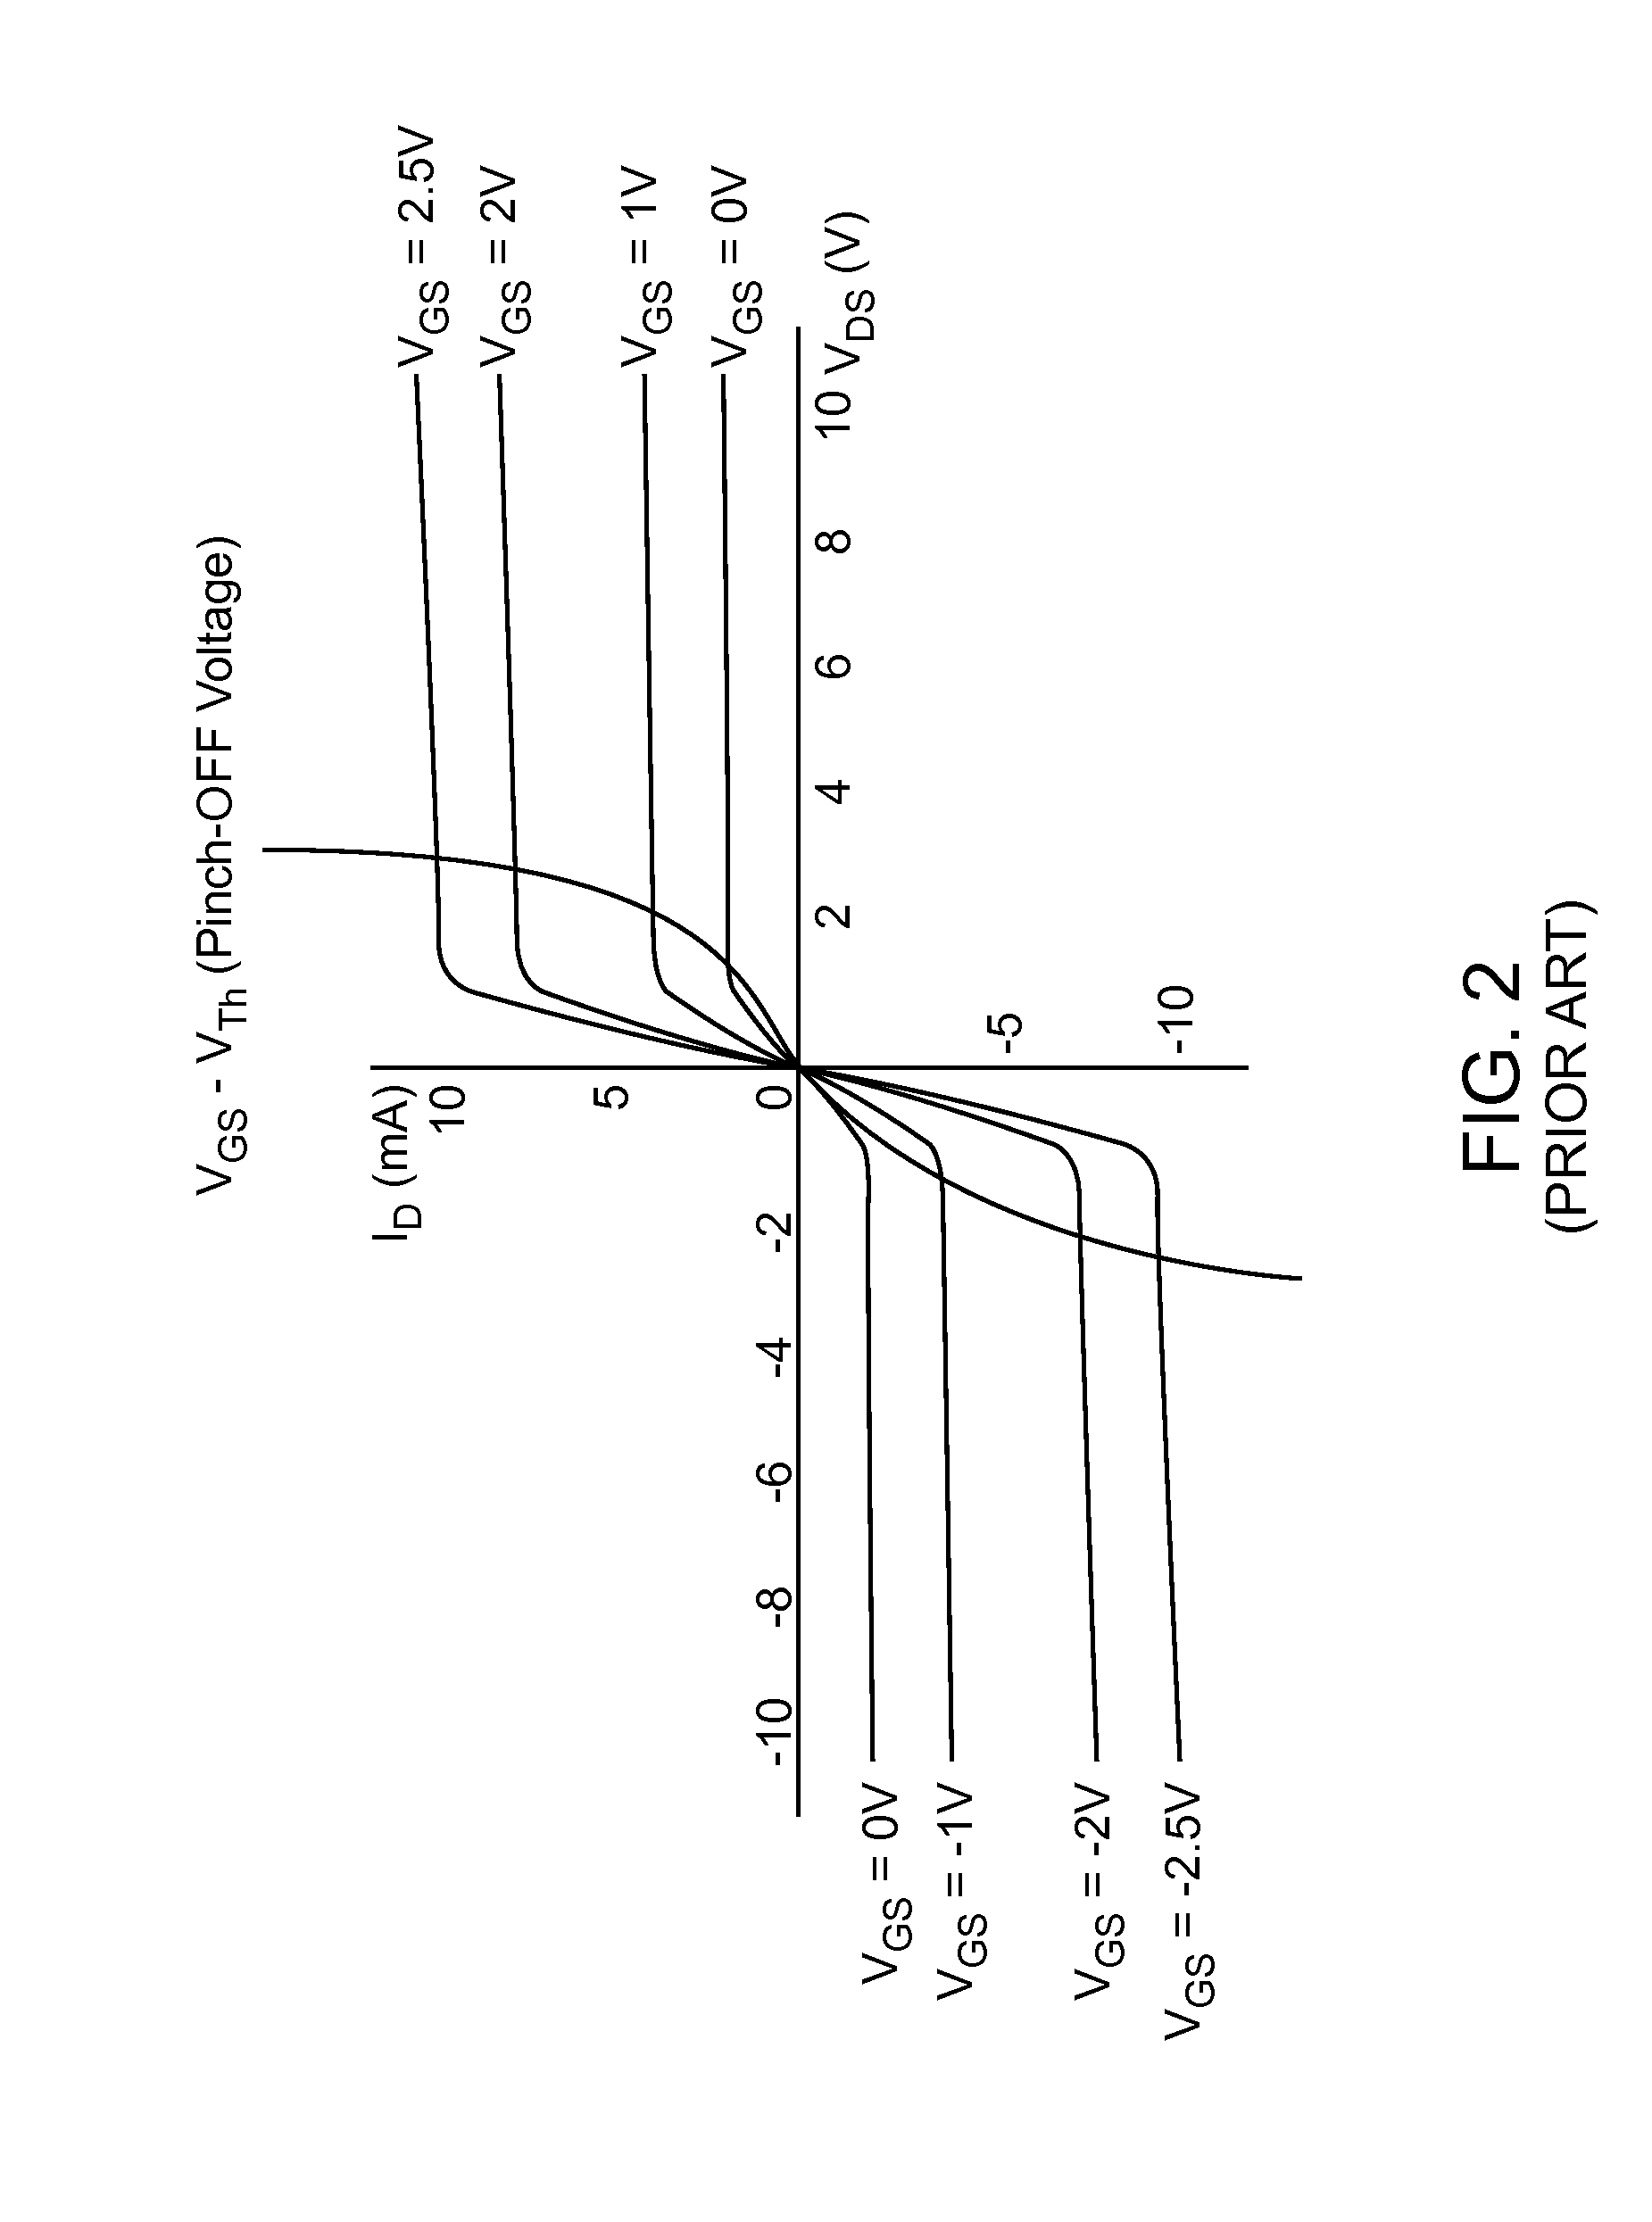 Systems and method of adjusting the compliance voltage in a neuromodulation device